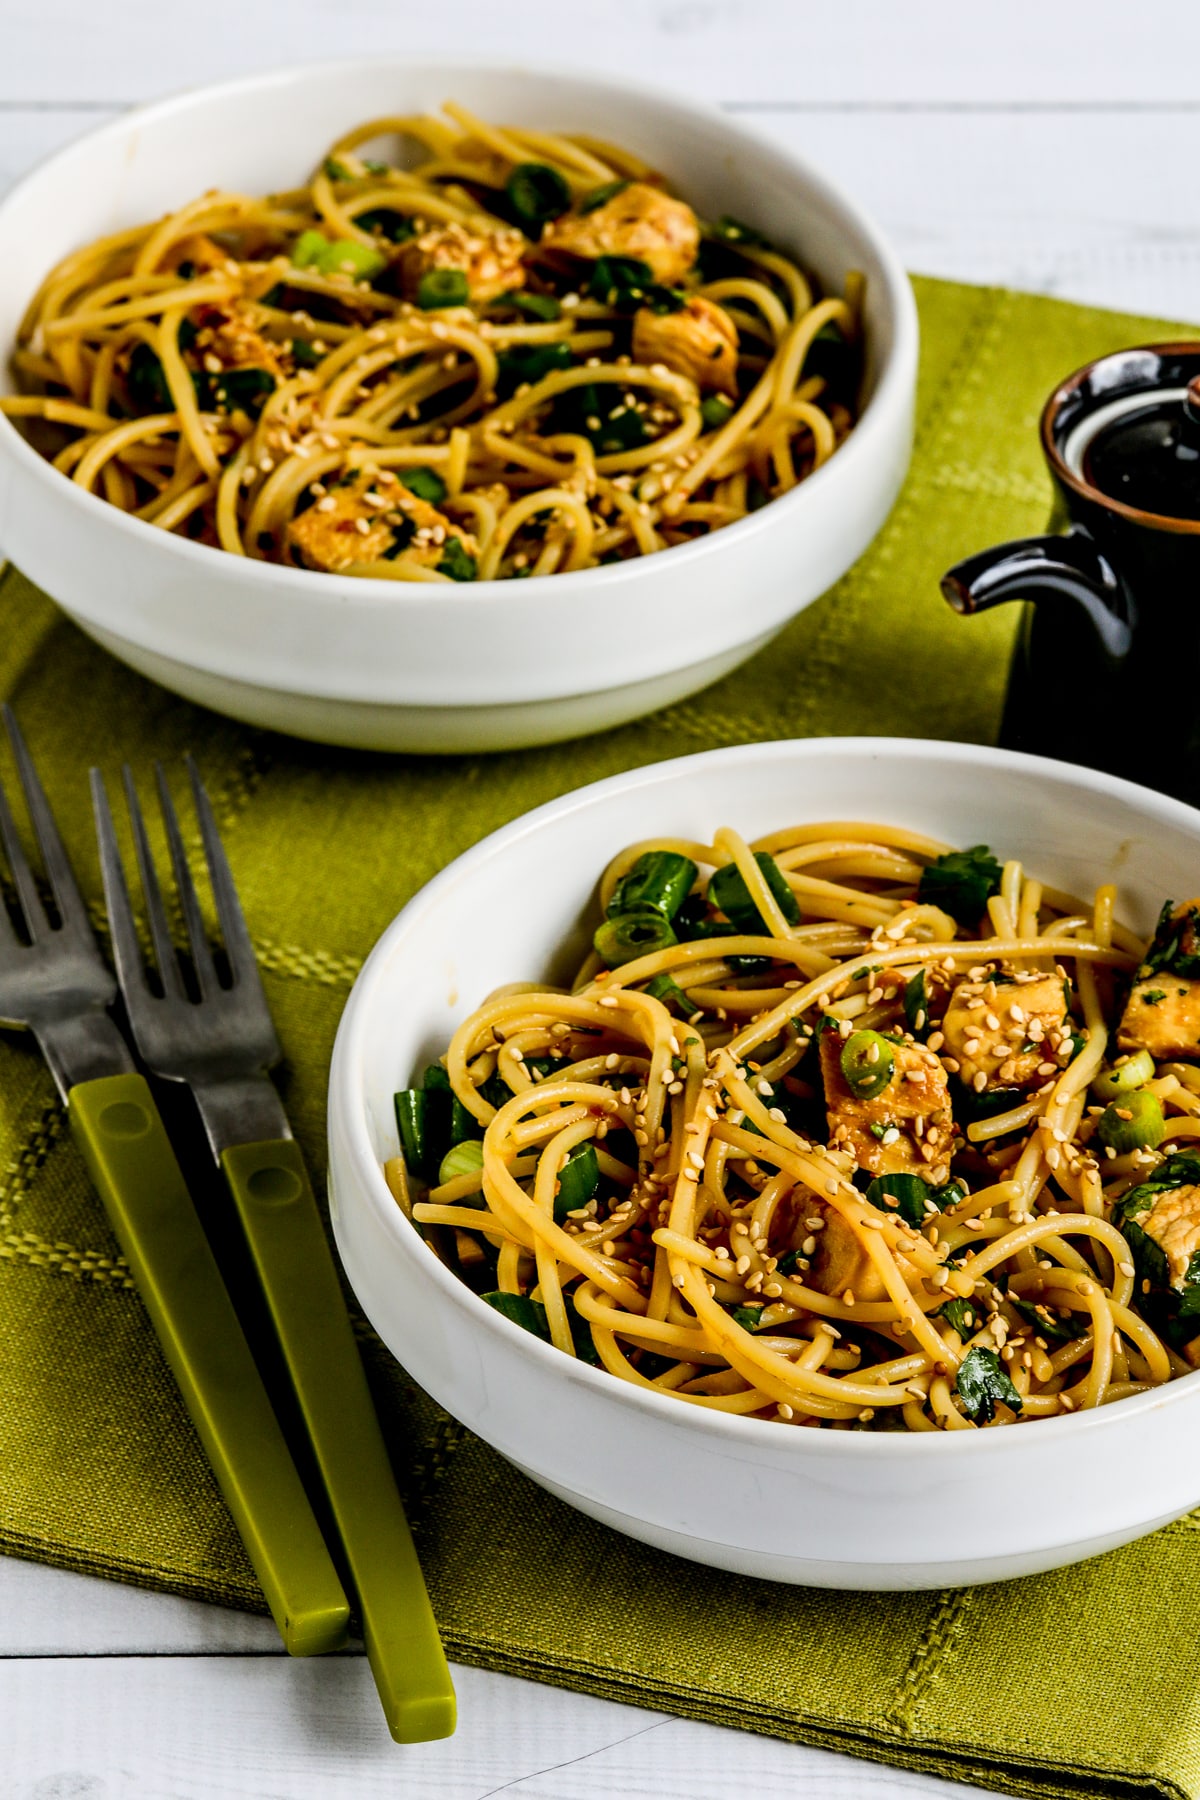 Sesame Noodles with Chicken in two serving bowls with soy sauce and green forks.